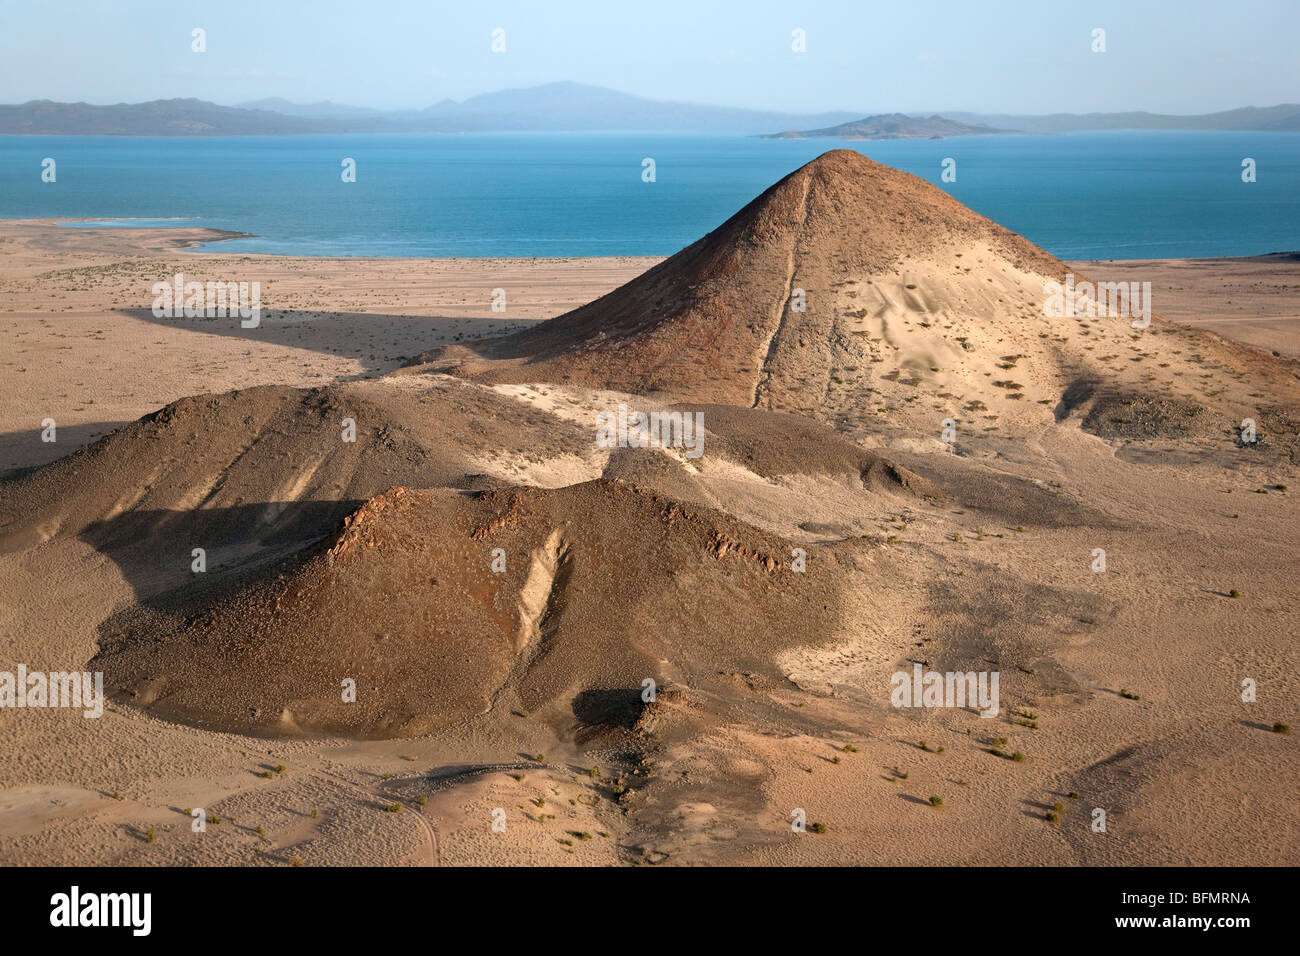 Porr Hill is a prominent geographical feature lying just off the eastern shores of Lake Turkana close to El Molo Bay. Stock Photo